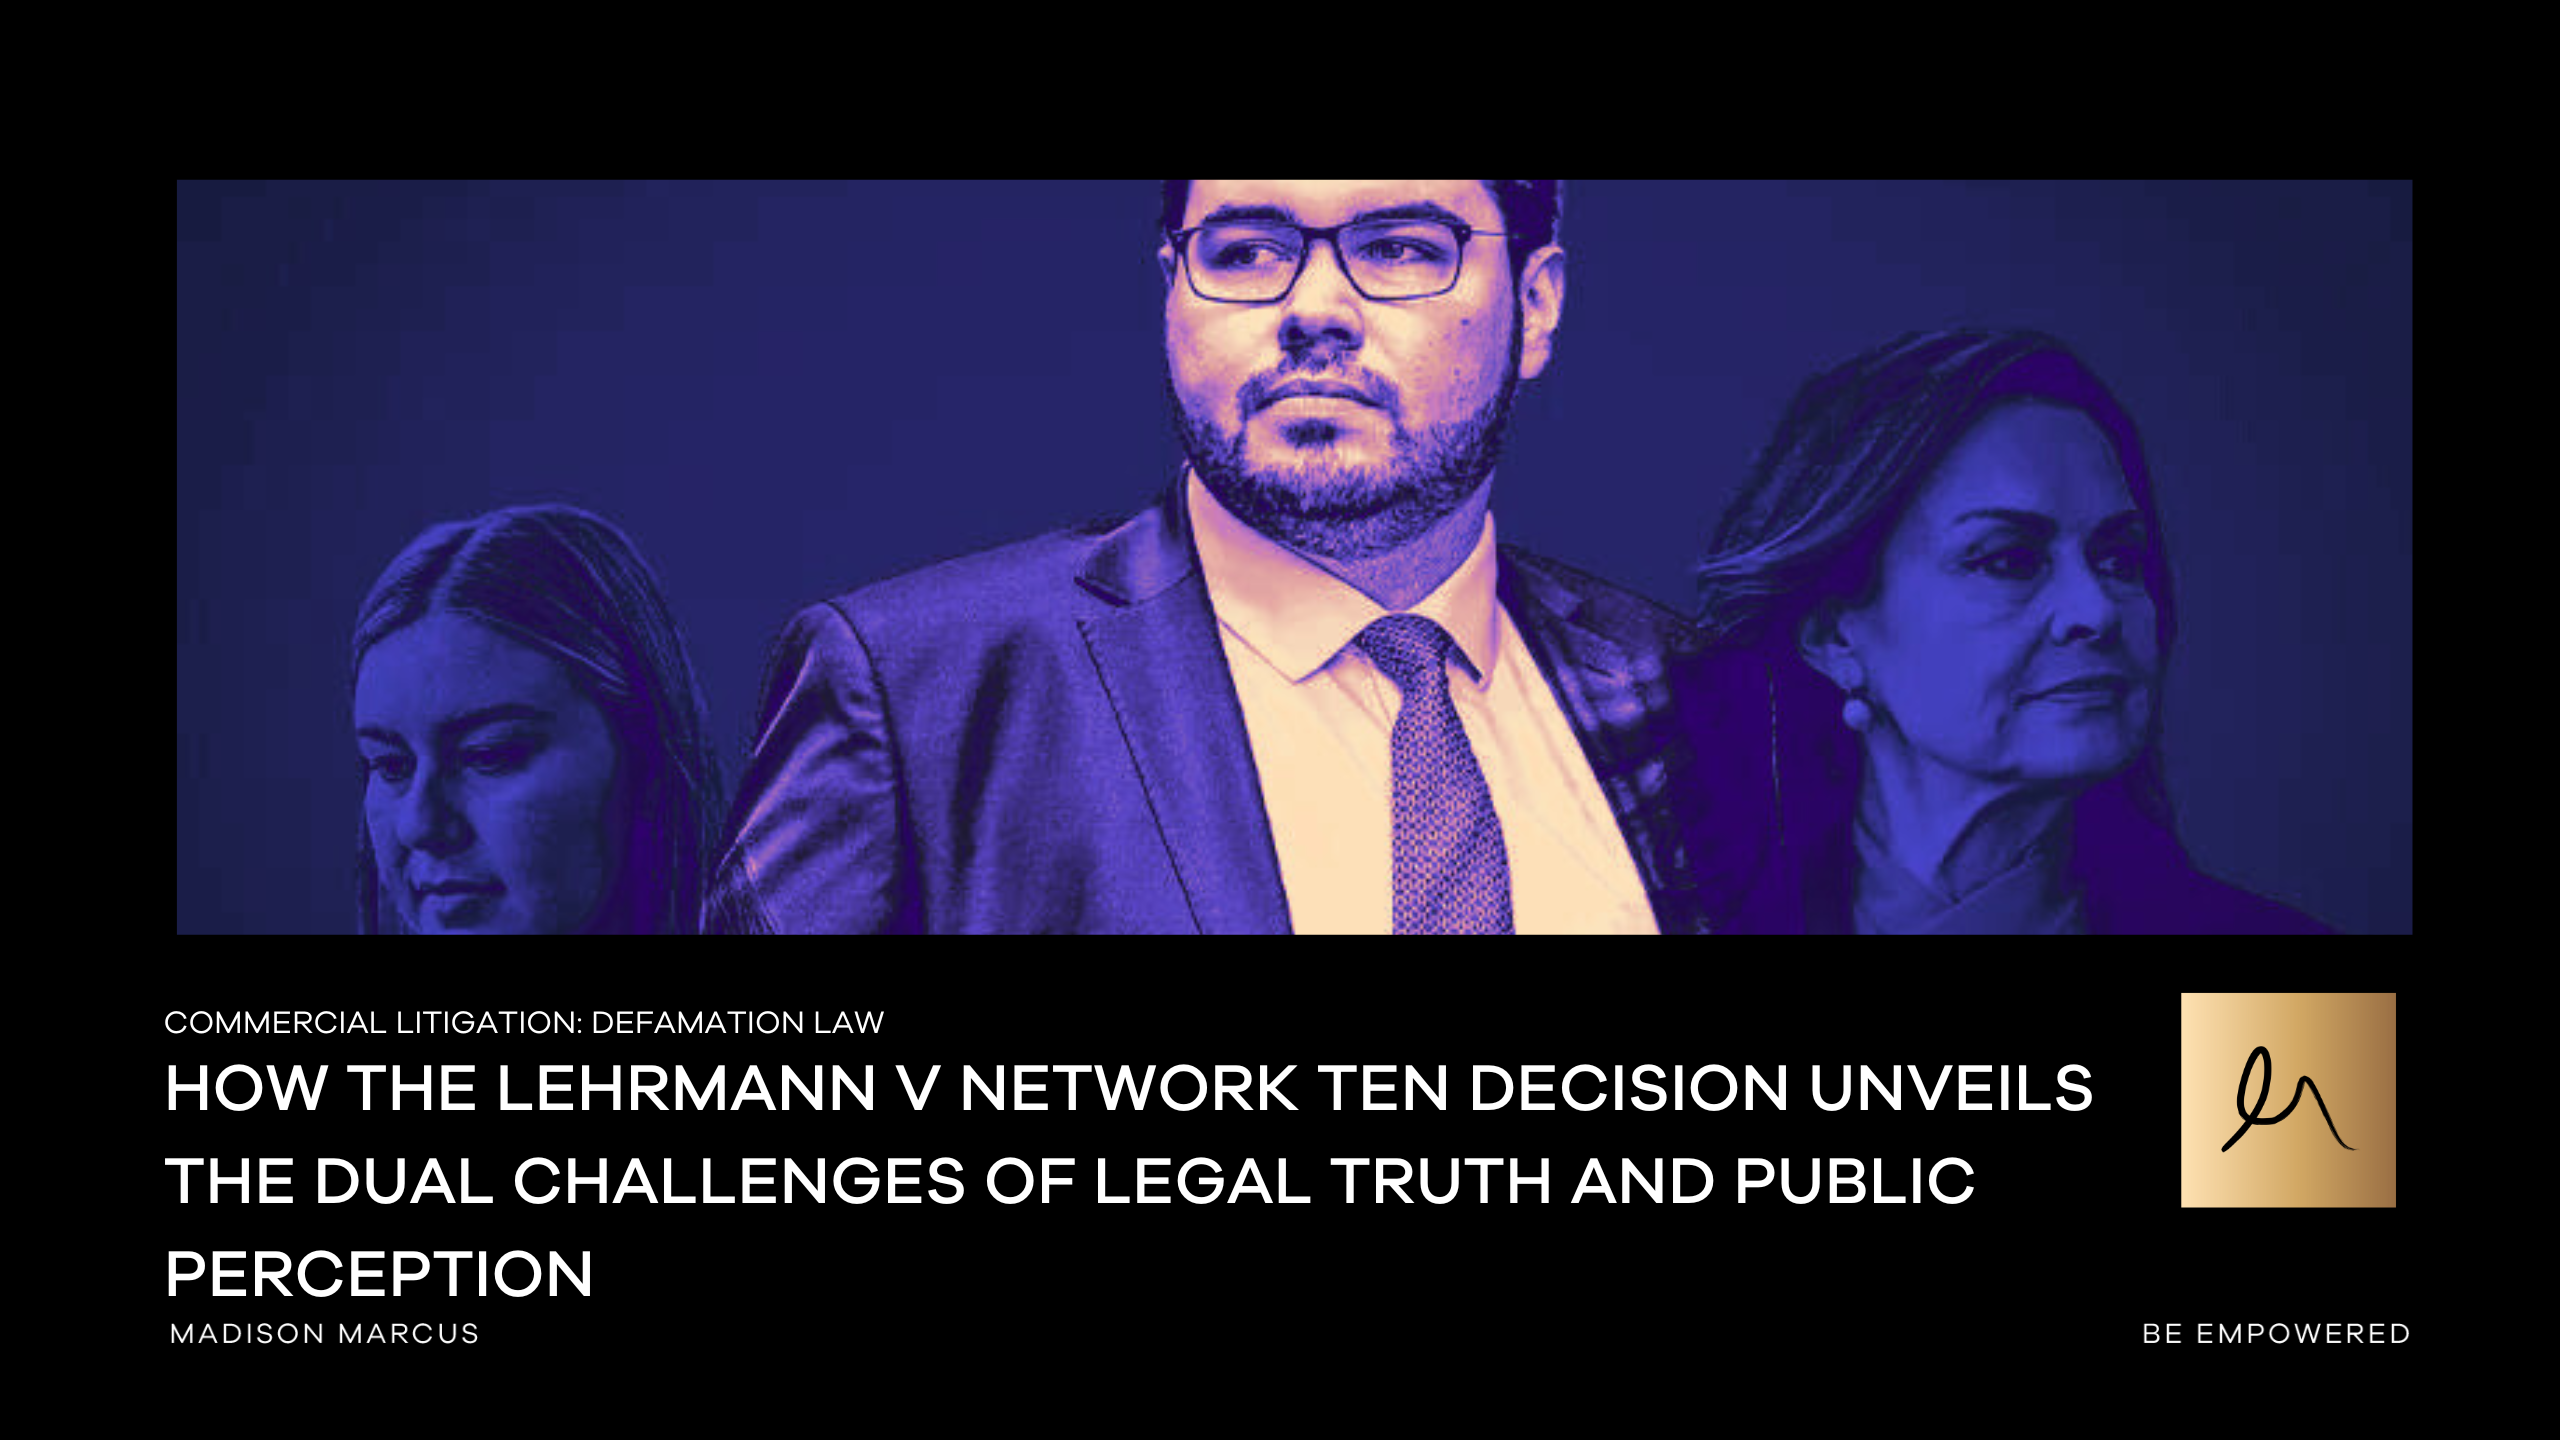 How the Lehrmann v Network Ten Decision Unveils the Dual Challenges of Legal Truth and Public Perception